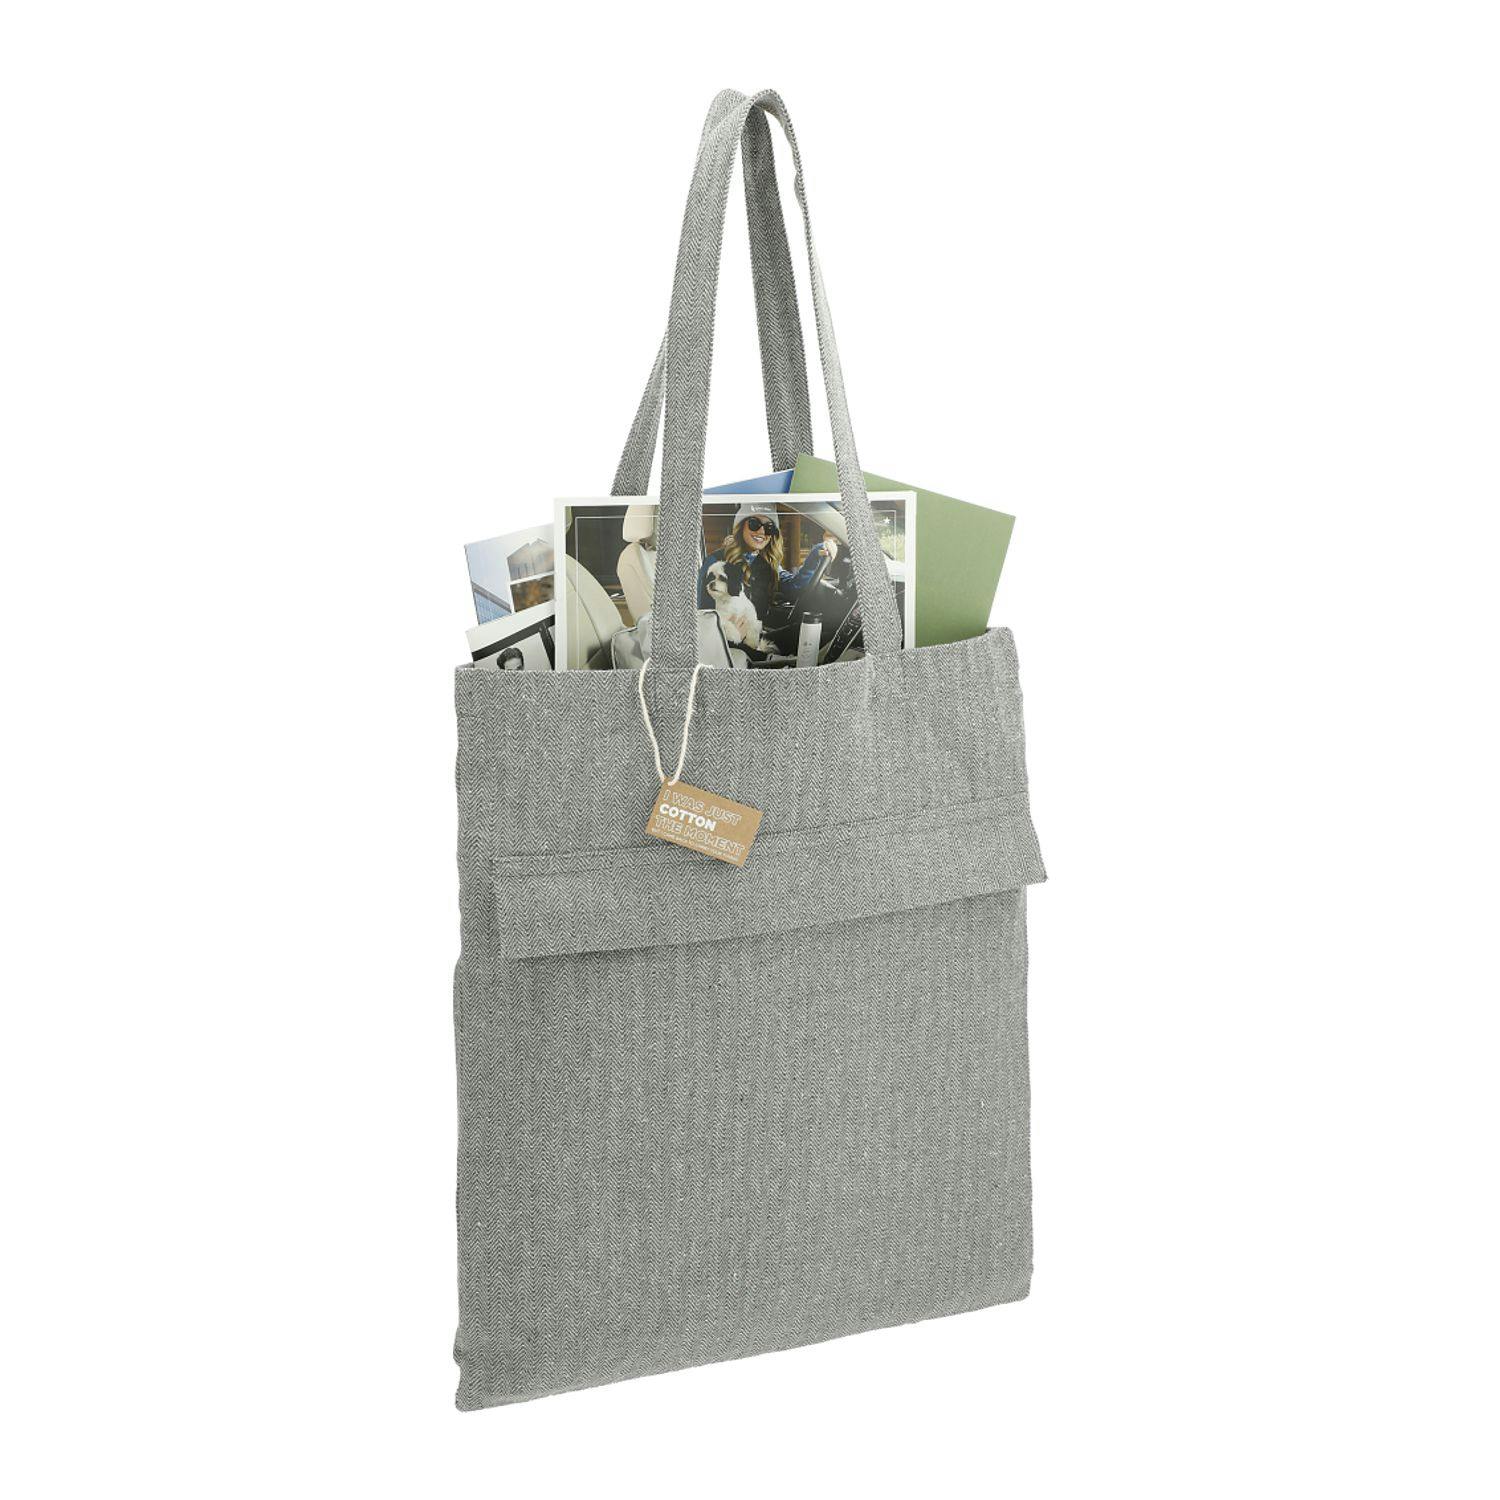 Recycled Cotton Herringbone Tote w/Zip Pocket - additional Image 4